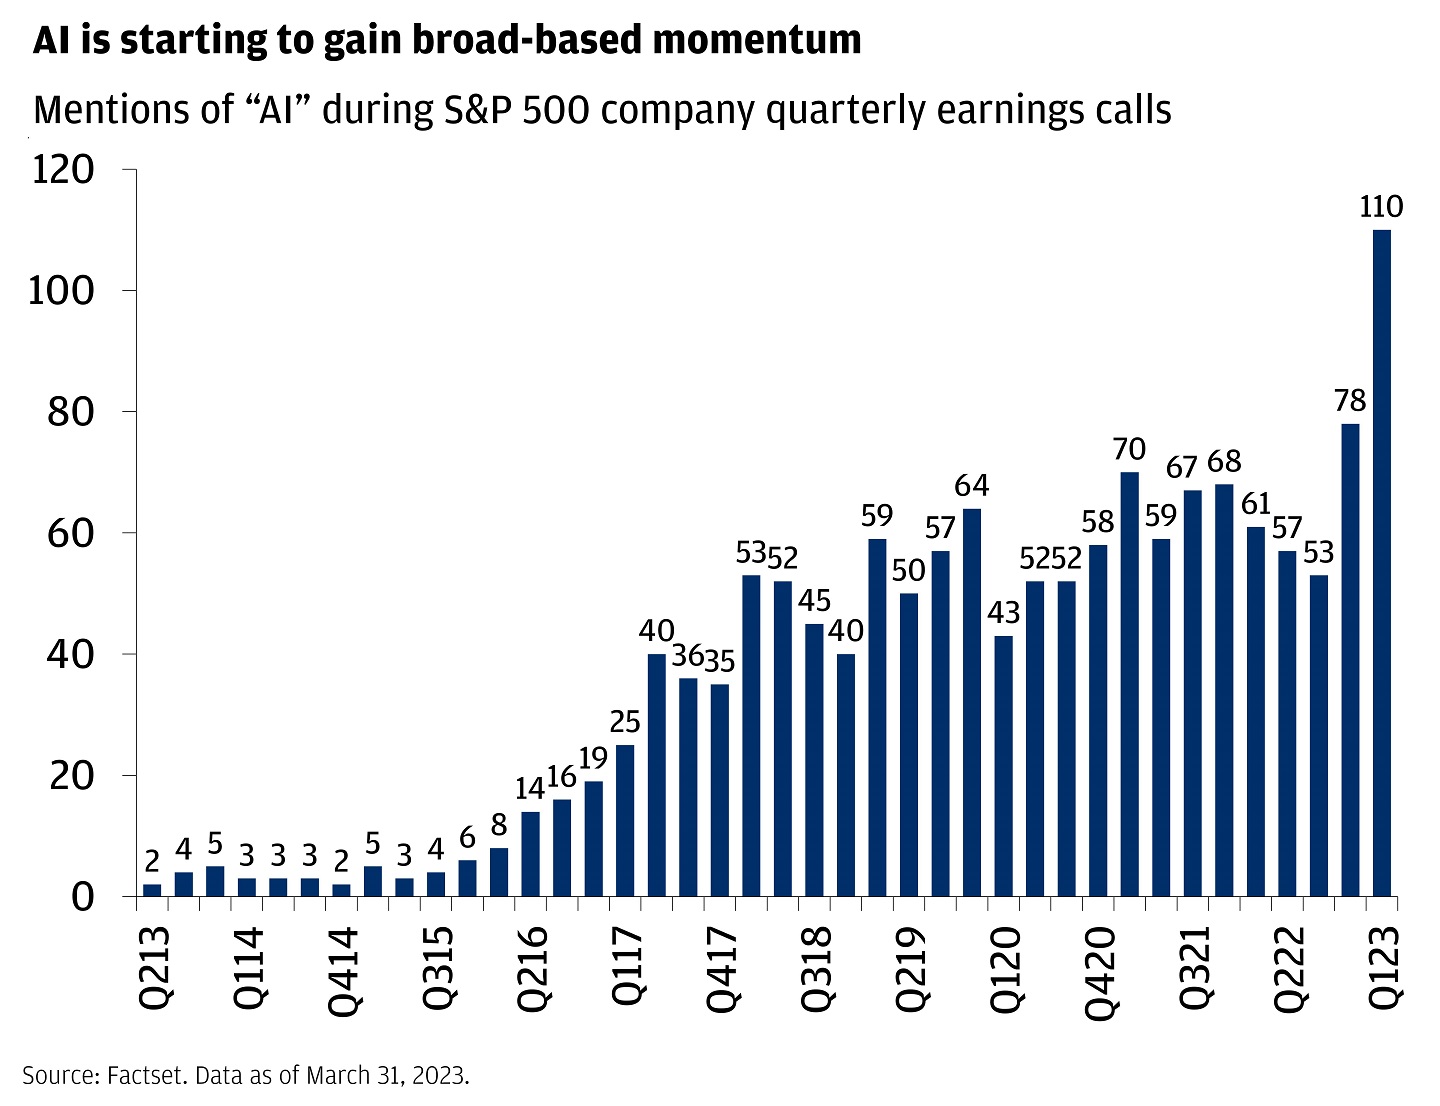 This chart showcases the number of citations of the phrase "AI" in S&P 500 company earnings calls, from 2013 to 2023. From around 2013 to 2016, only moderate year-over-year increases can be noted, with figures of approximately 2 only rising to approximately 8 respectively. 